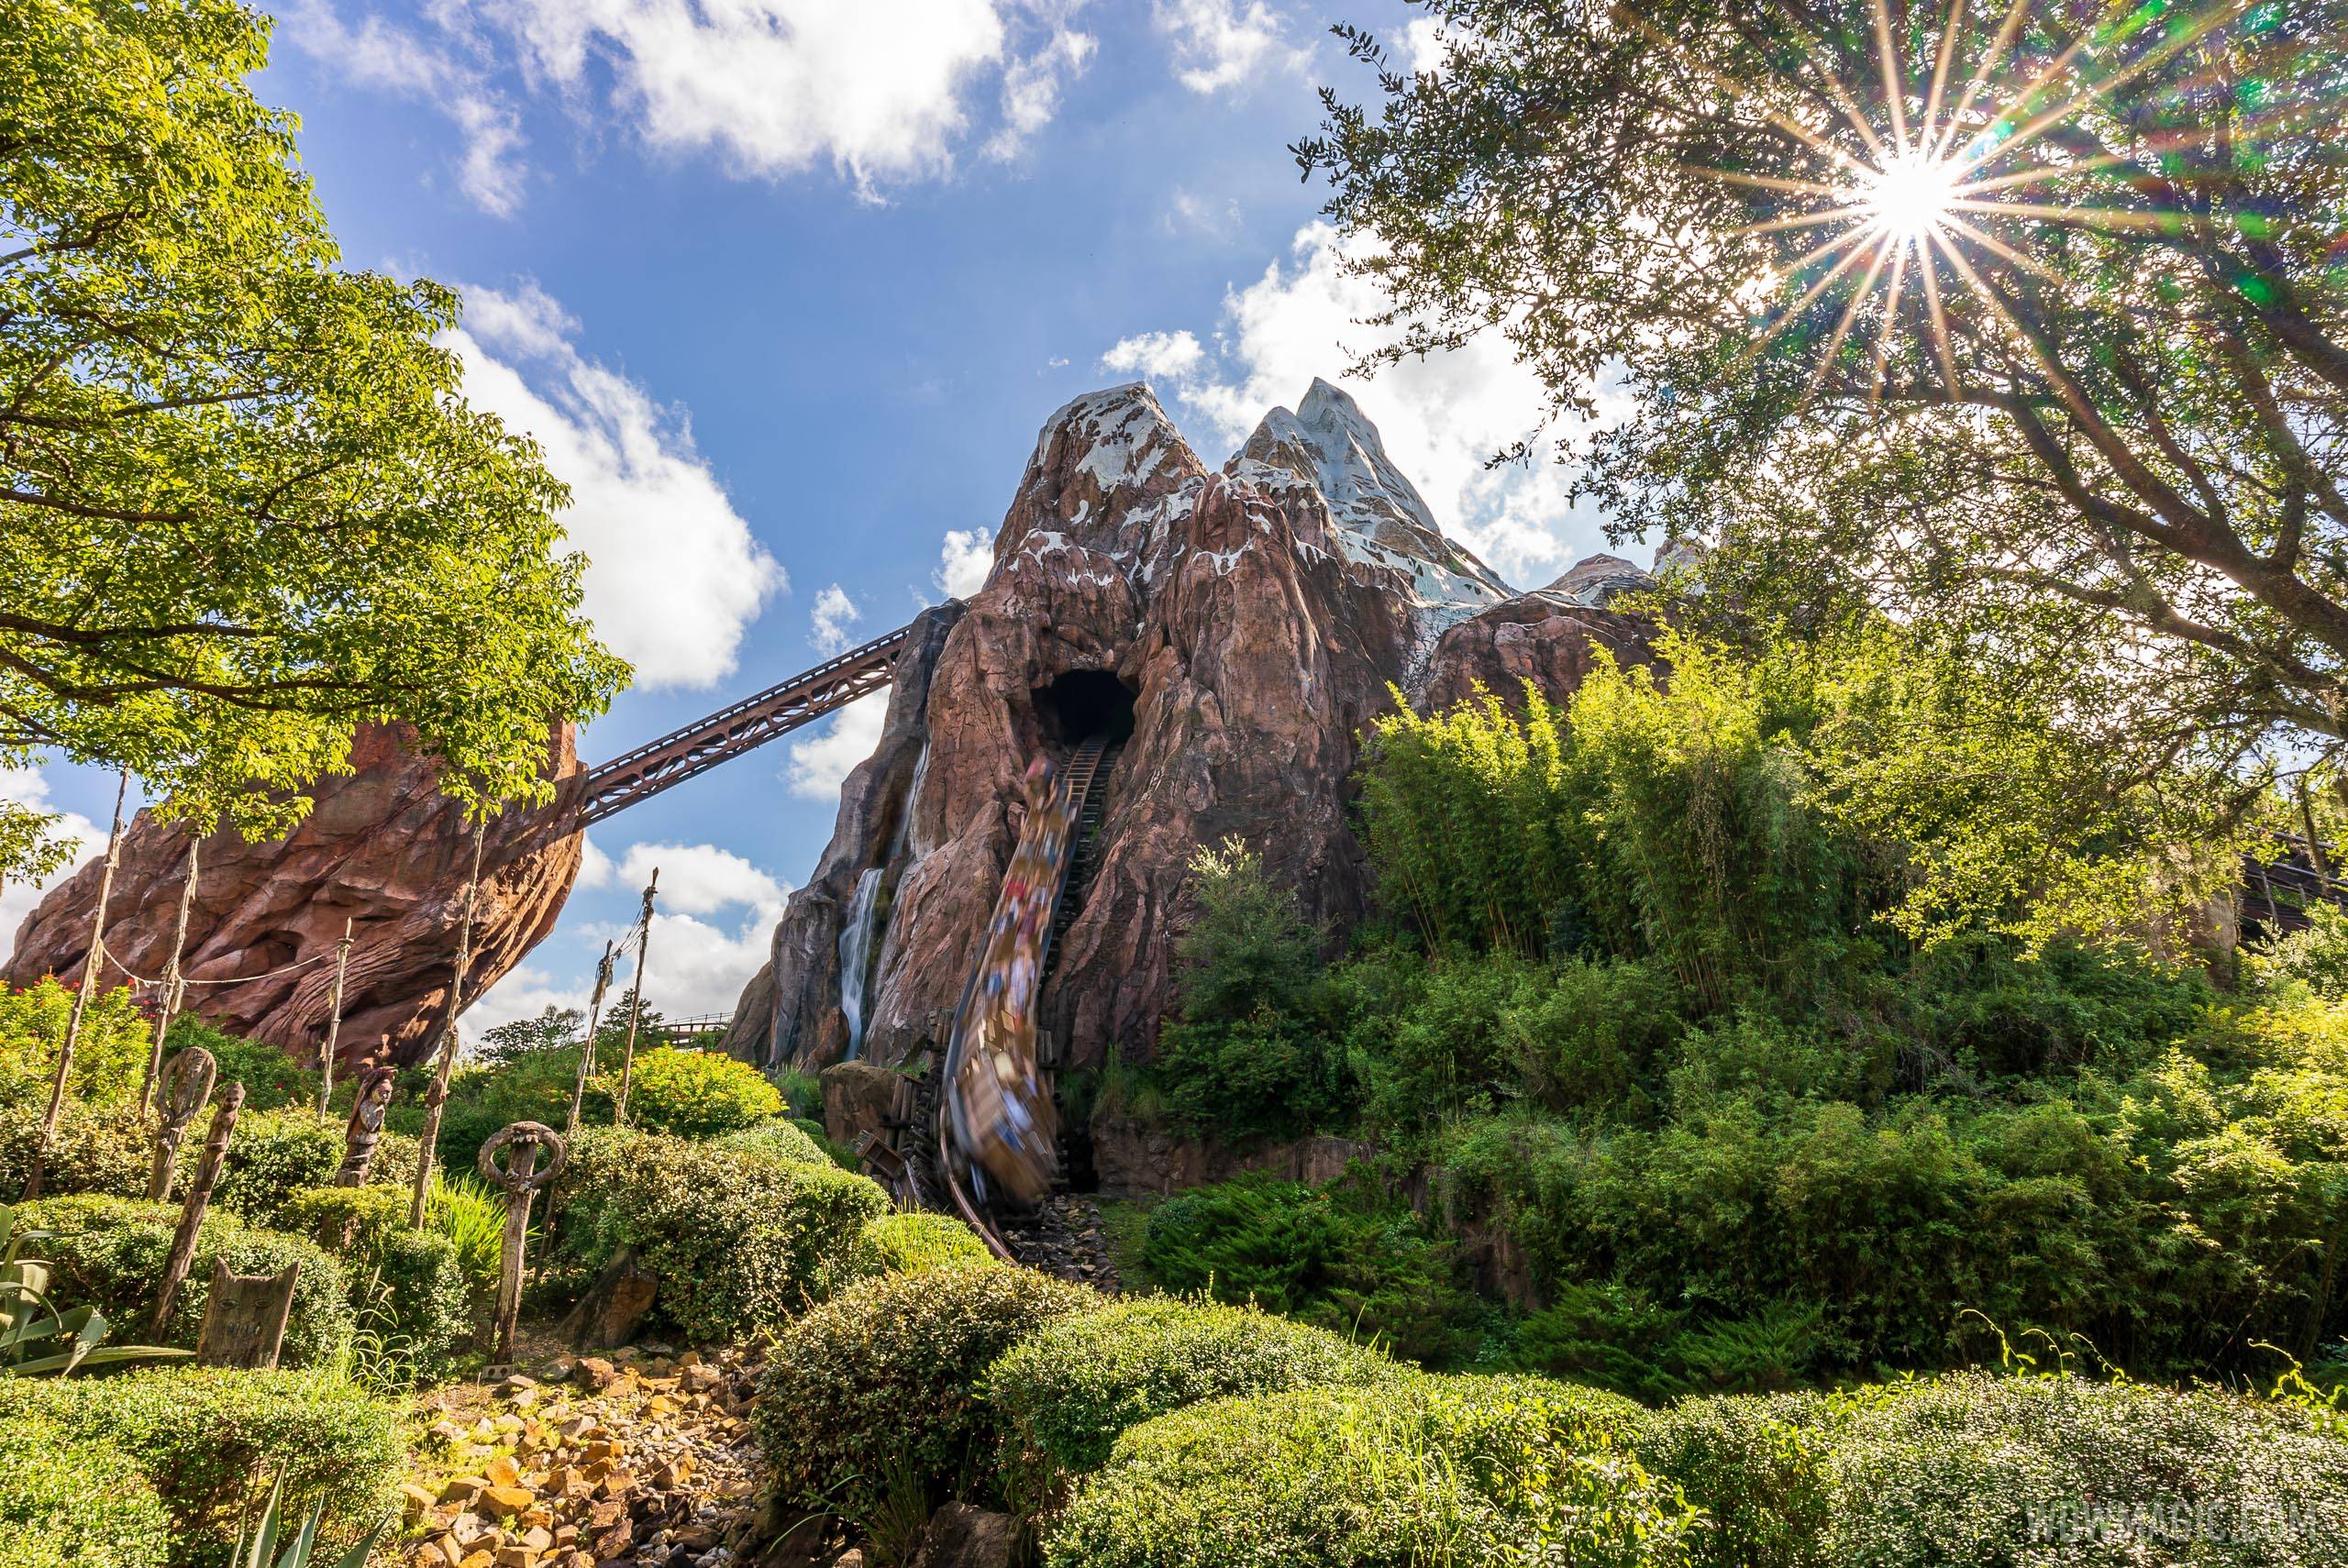 Annual Passholder Preview dates for Expedition Everest announced